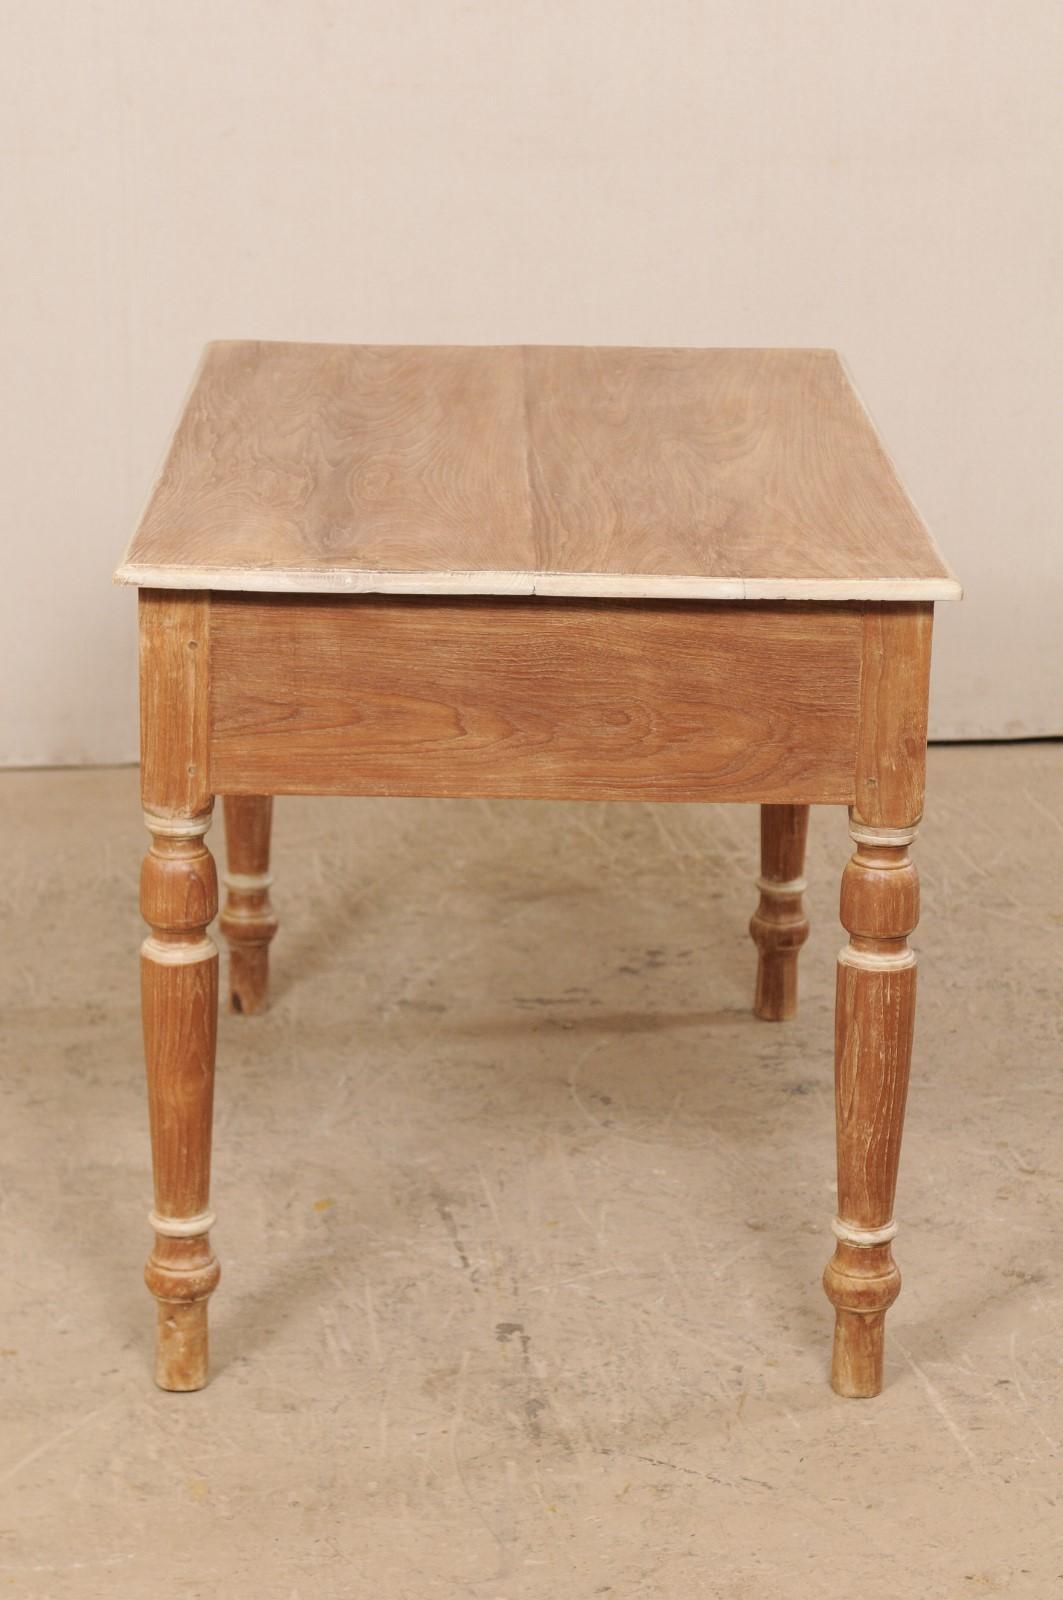 Bleached Early 20th Century British Colonial Occasional Table with Drawers